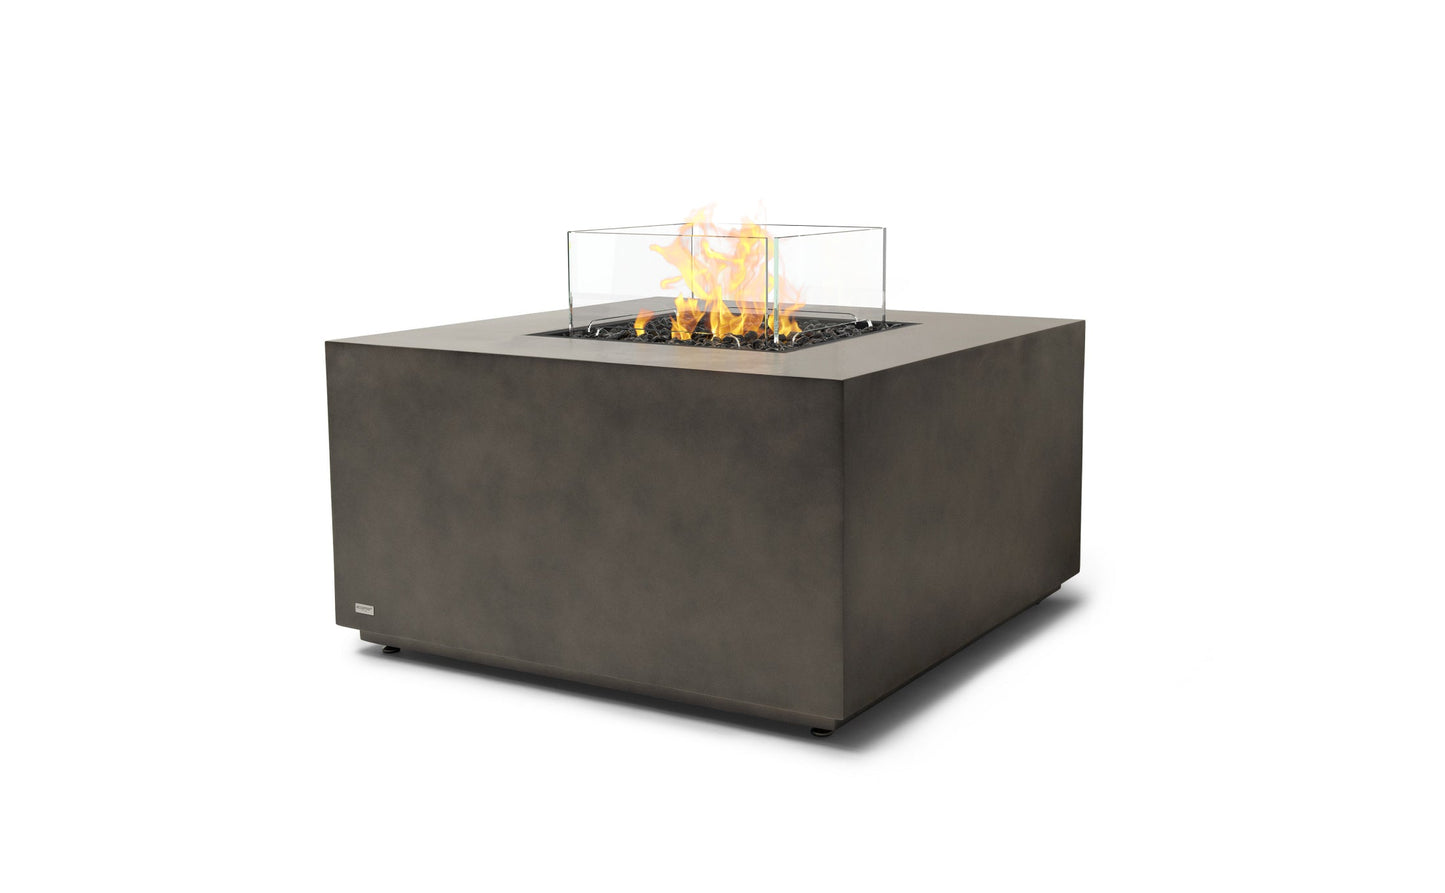 EcoSmart Fire - Chaser 38 - Gas Fire Pit Table - Natural